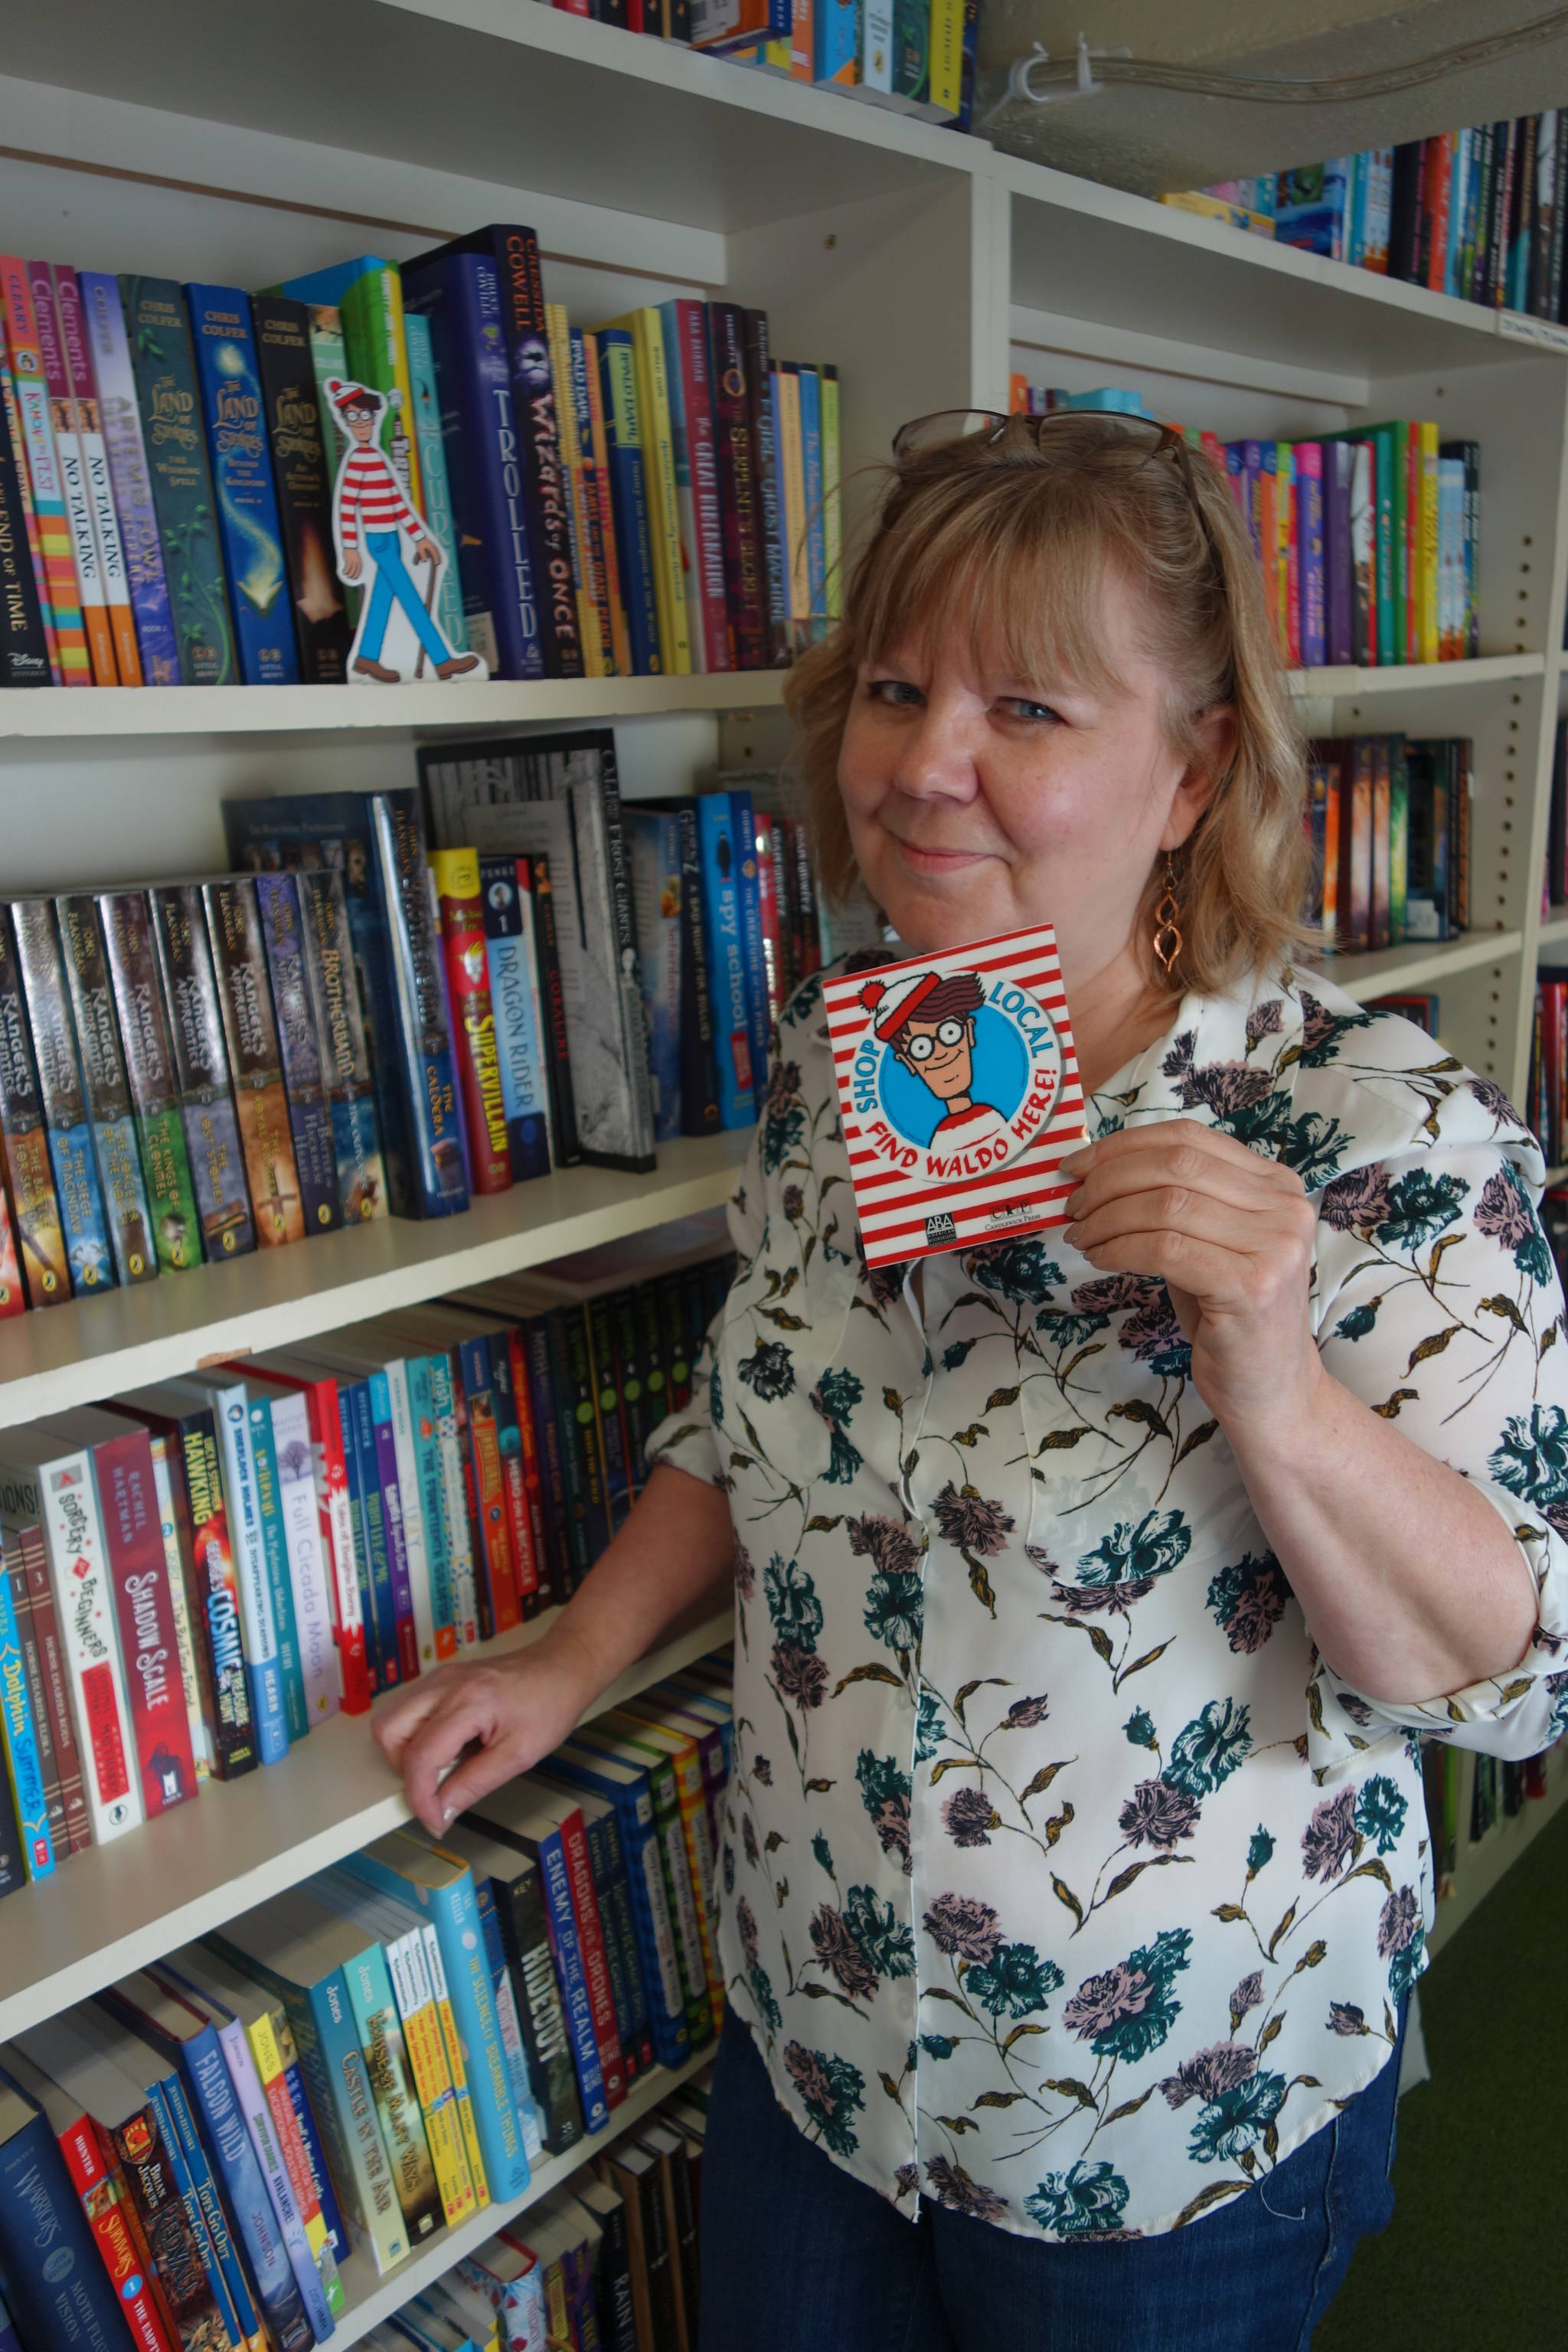 Hearthside Books owner Brenda Weaver holds the “Where’s Waldo?” sign which will be displayed in downtown Juneau businesses in July to signal to seekers that a six-inch, cardboard Waldo will be hiding in the store. In this July 21 photo, Waldo can be seen standing on the bookshelf. Clara Miller | Capital City Weekly